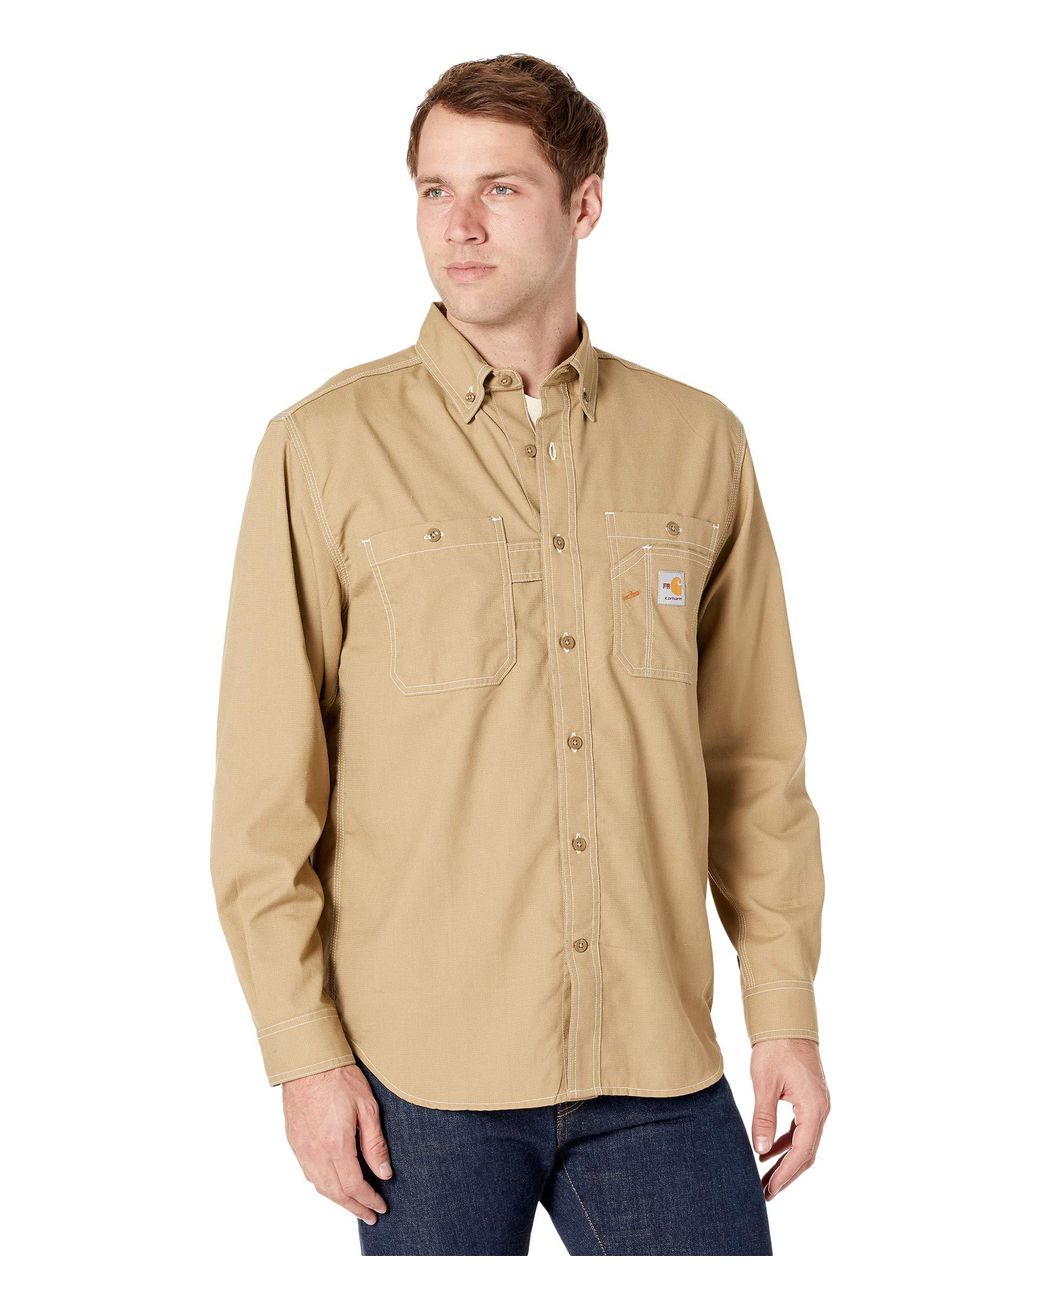 Carhartt Synthetic Flame-resistant Force Original Fit Lightweight Long ...